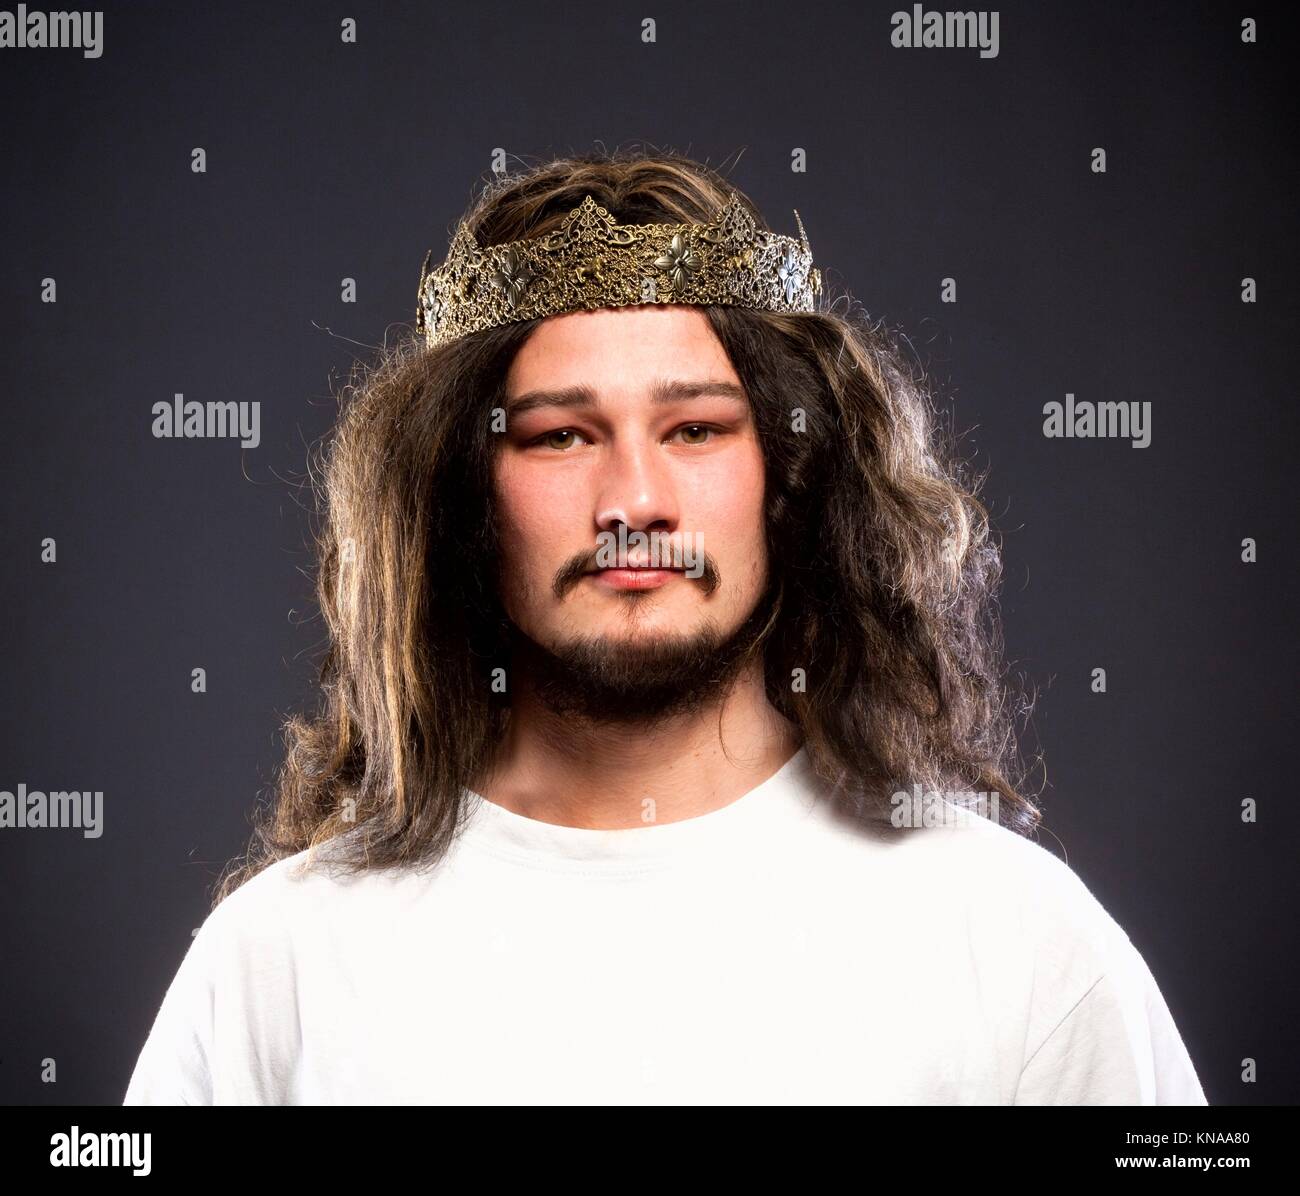 Portrait of a King with Crown and Dark Hair. Stock Photo